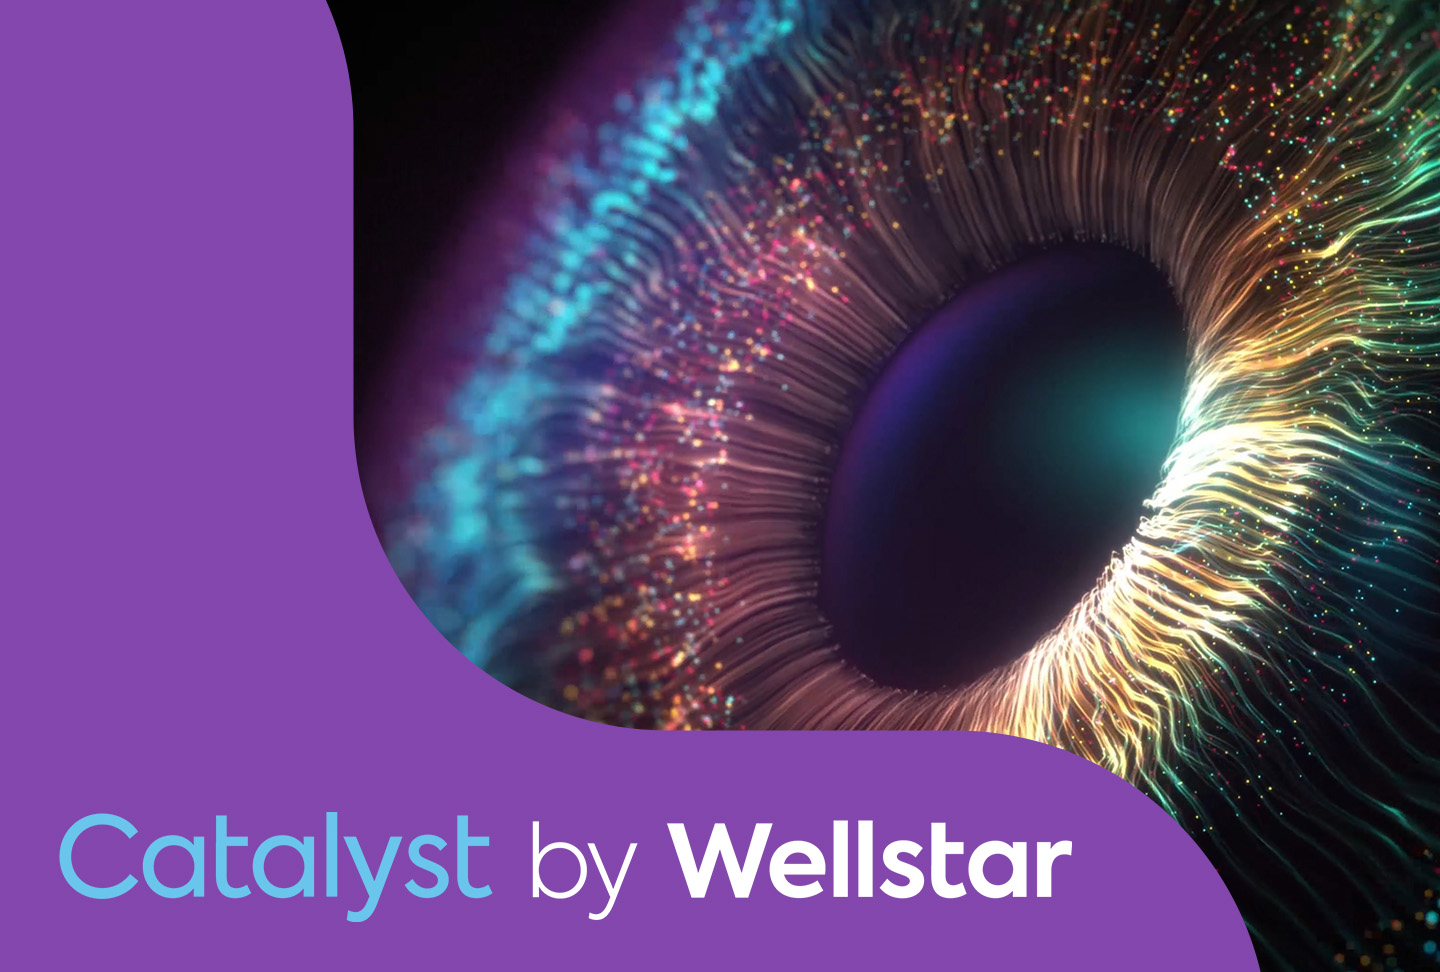 Wellstar Announces First-of-its-Kind Global Digital Health and Innovation Center Image